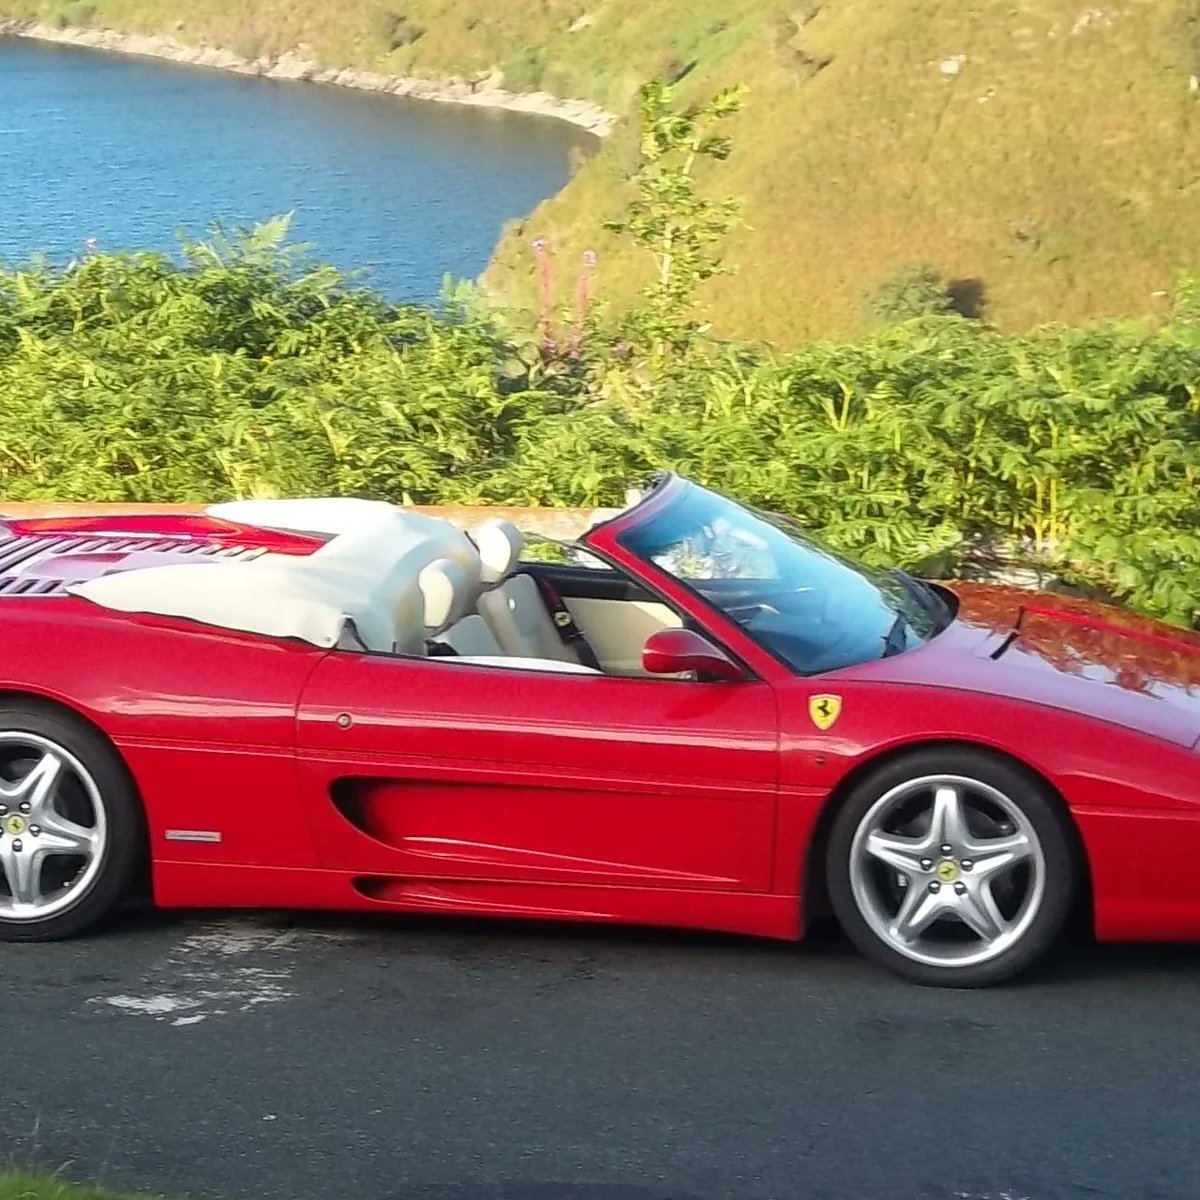 We just love happy customers! 🤩🤗
'The car has been a dream to drive ever since I found you.' 🙌 Check out his BEAUTIFUL ride. 😍
#HappyCustomer #Ferrari #F355 #ECU #ECURepair #EngineComputer #Manufacturing #DreamCar #UK #InternetSearch #Purr #Roar #Thrilled